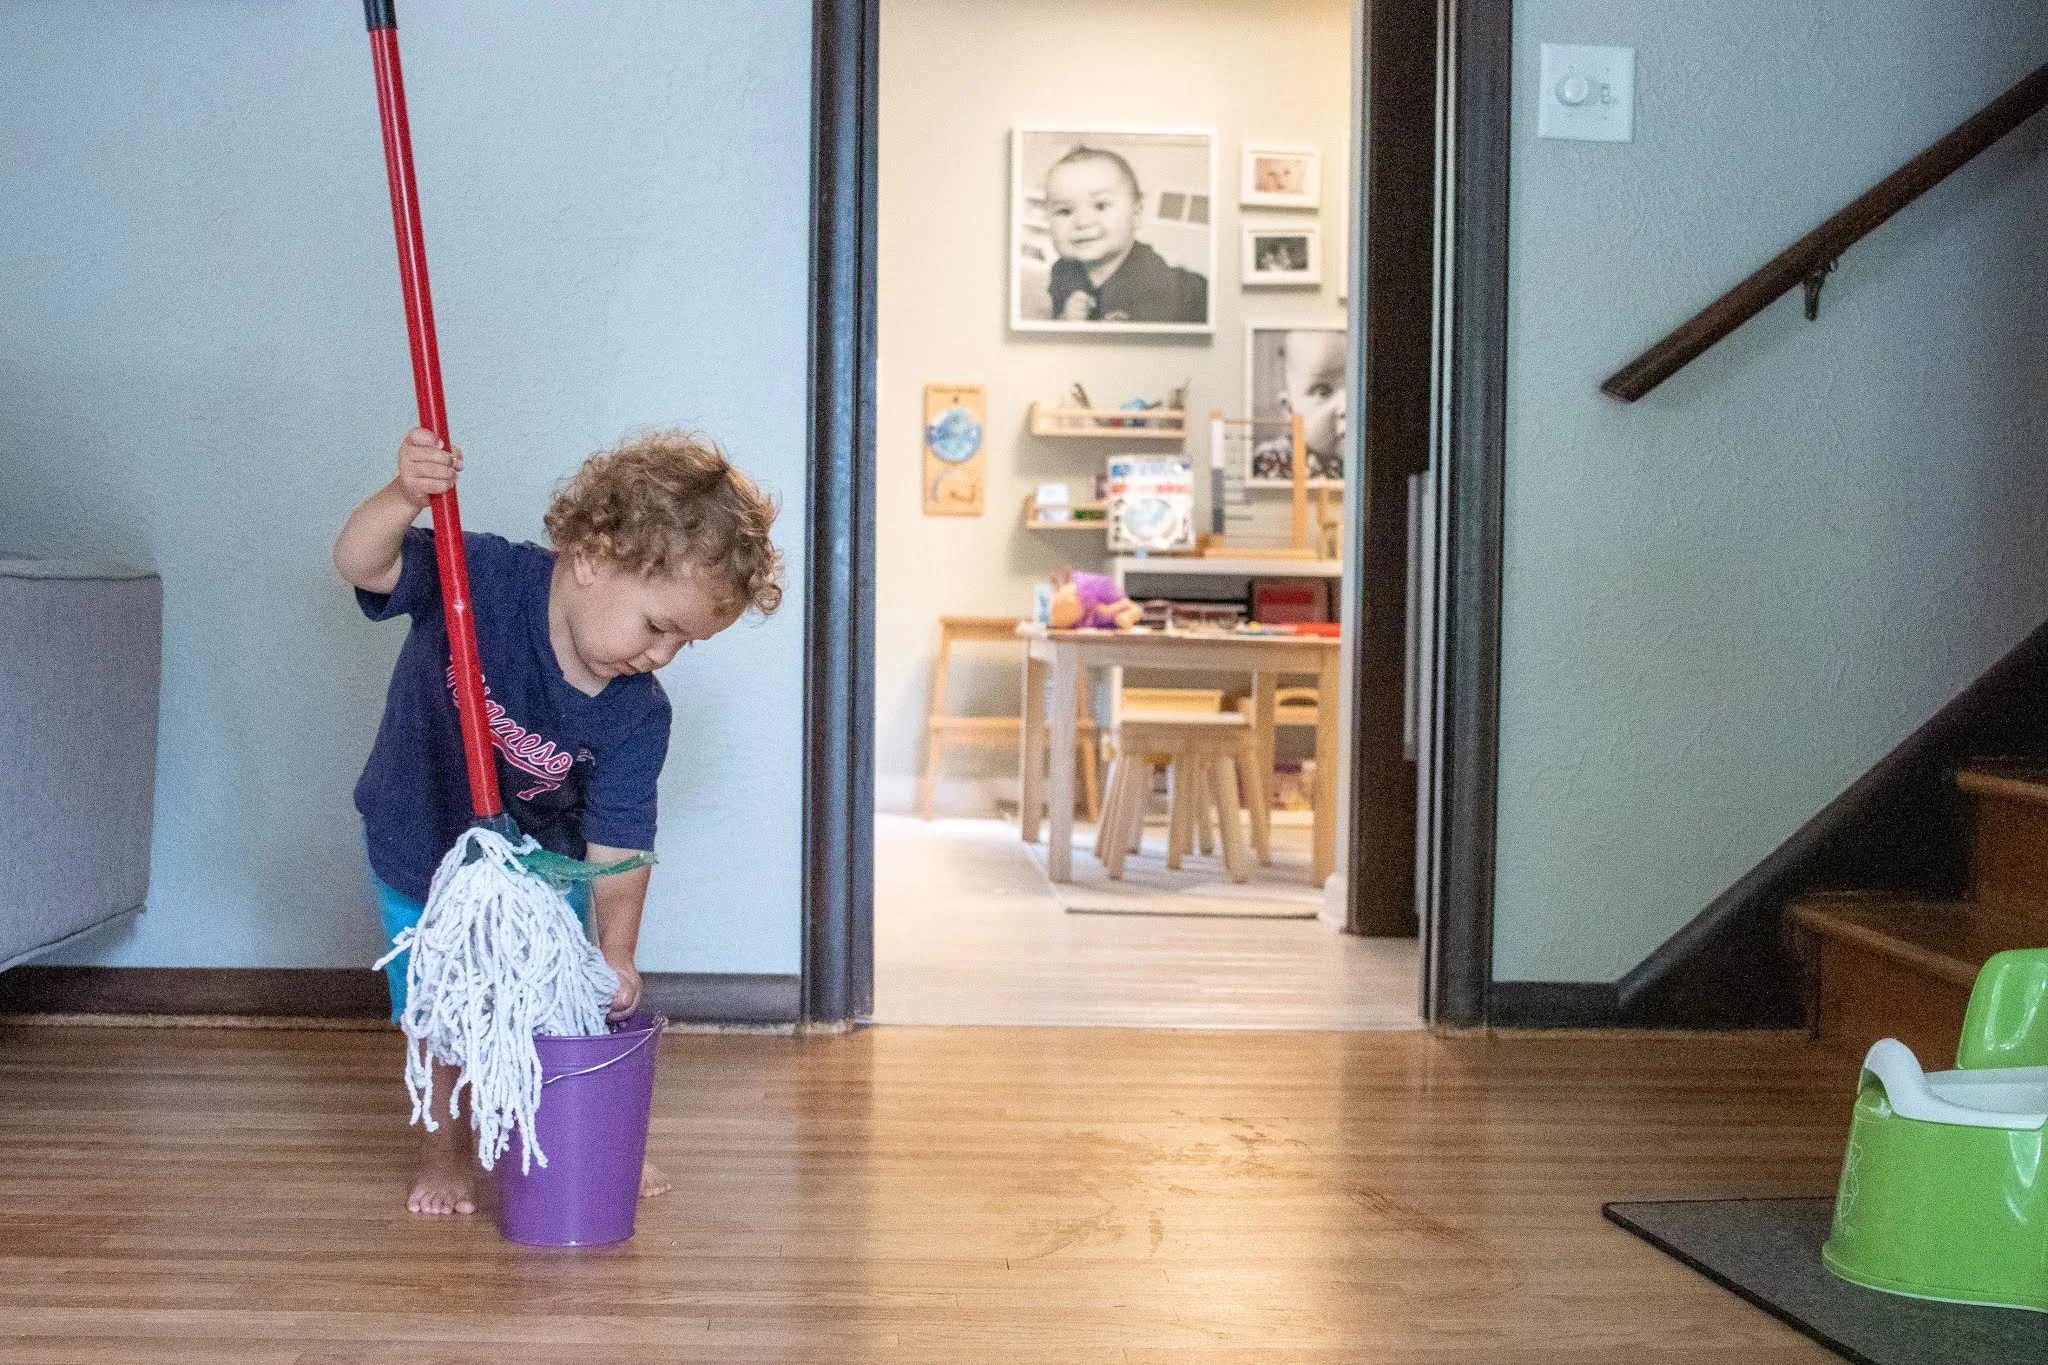 Montessori toddler places small child sized mop into bucket of water to wash floors.